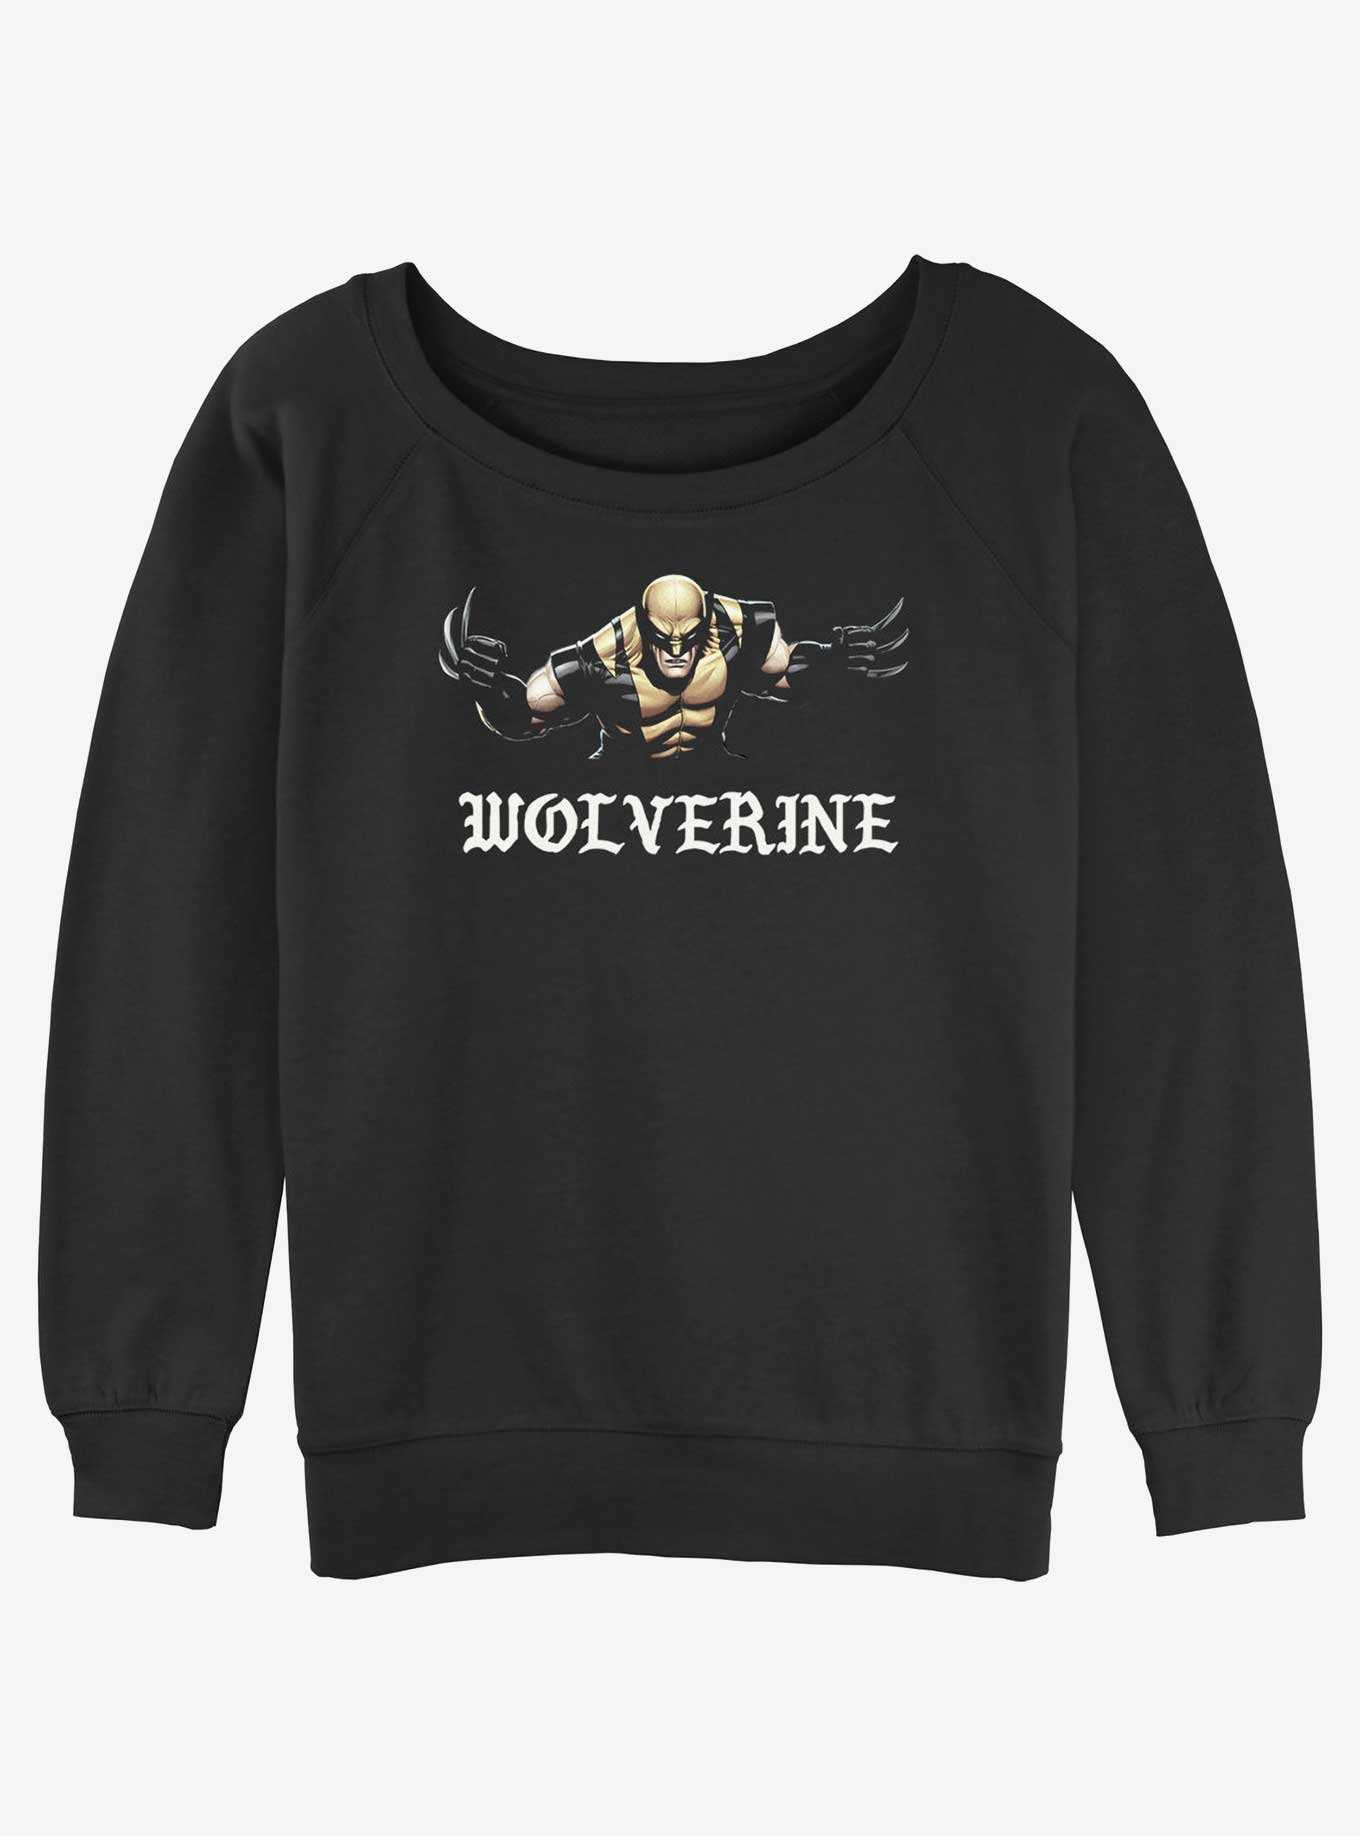 Wolverine Punch With Blades Womens Slouchy Sweatshirt, , hi-res